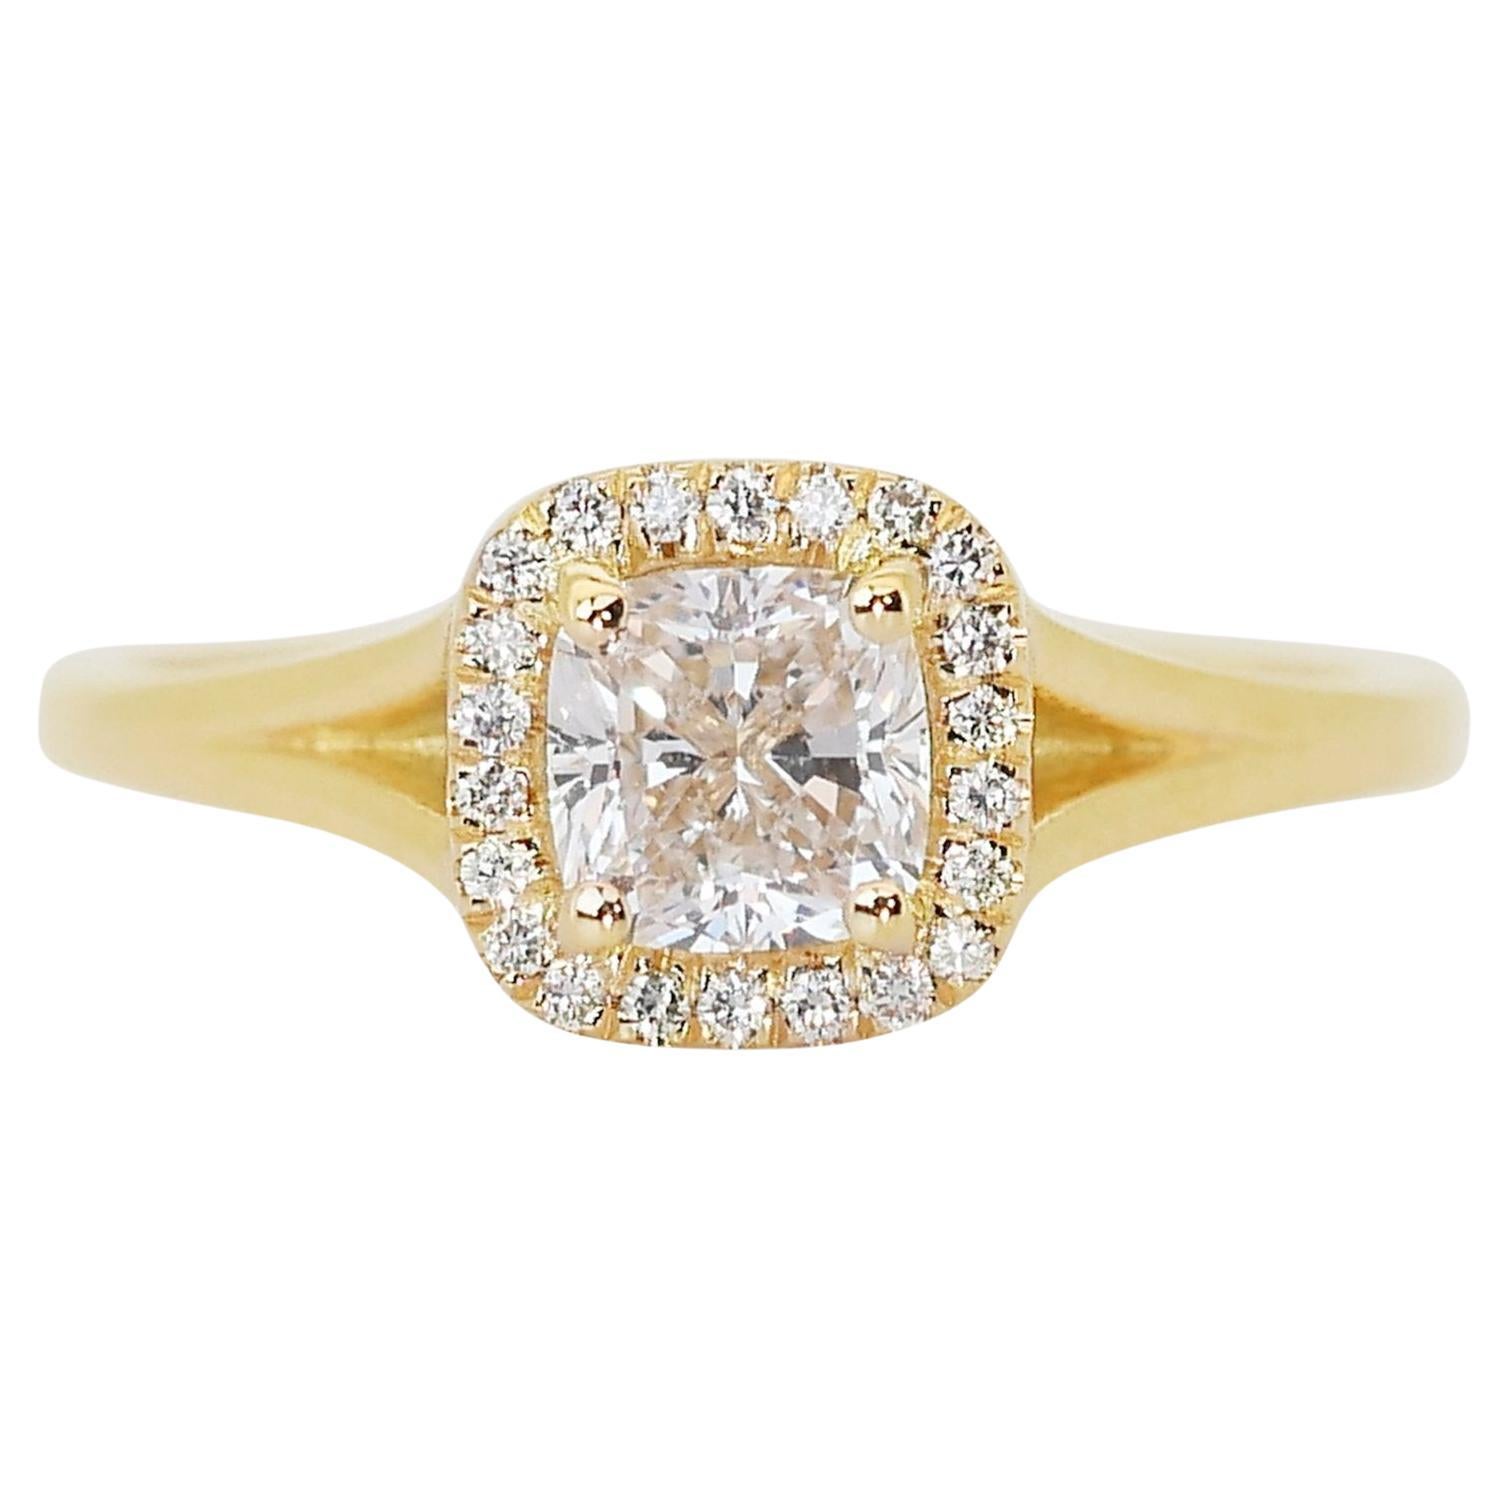 Sparkling 1.63ct Diamond Halo Ring in 18k Yellow Gold - GIA Certified For Sale